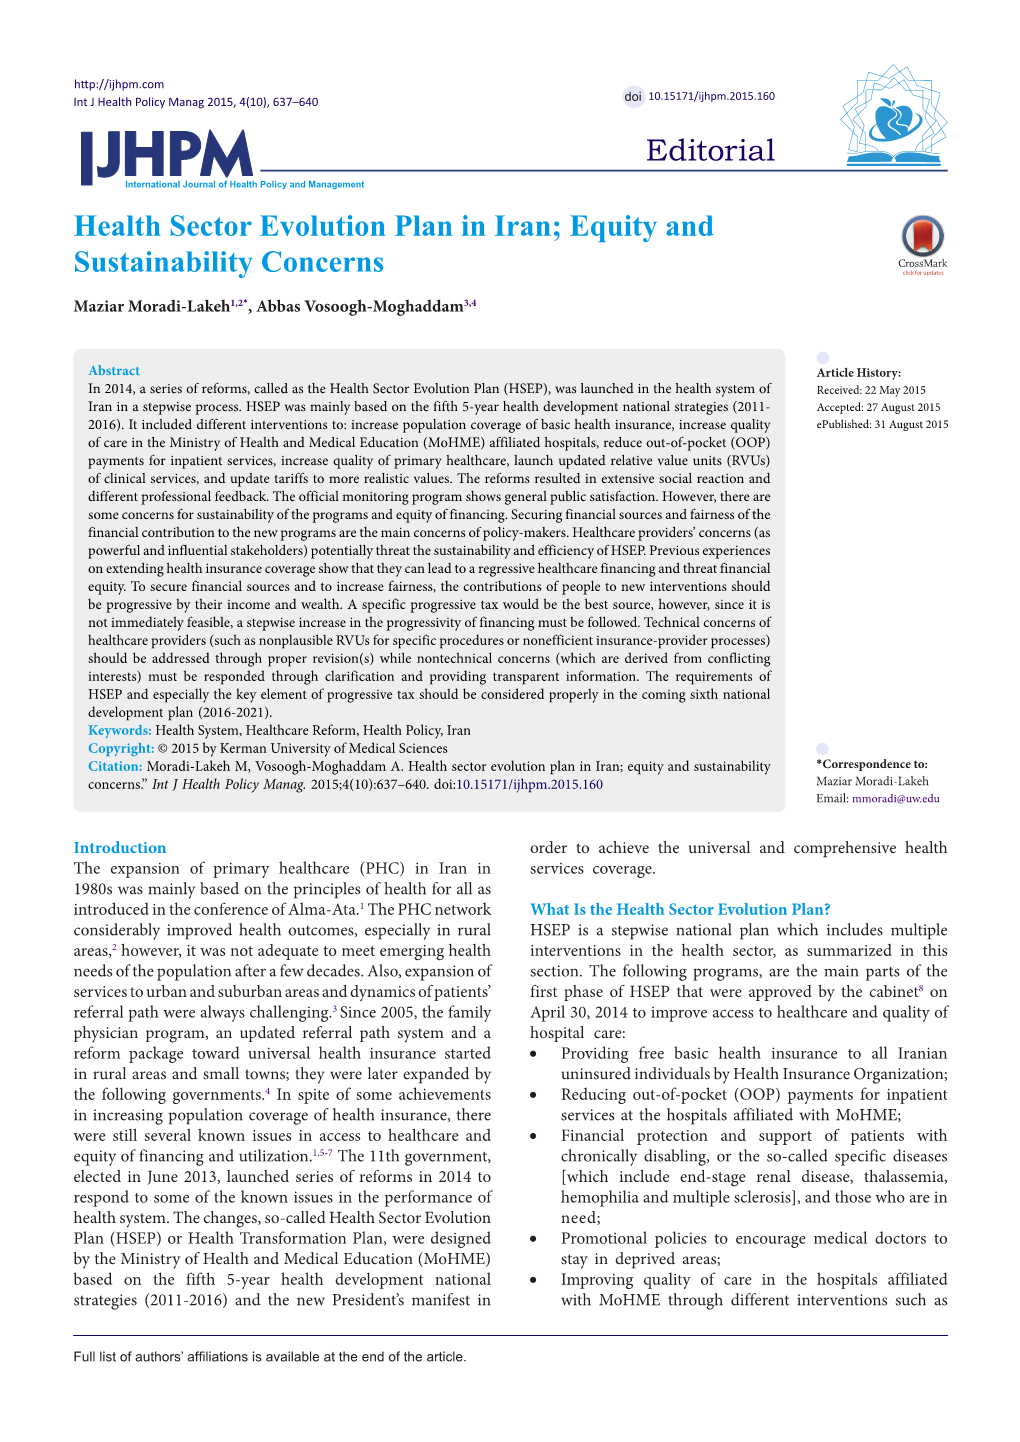 Health Sector Evolution Plan in Iran; Equity and Sustainability Concerns